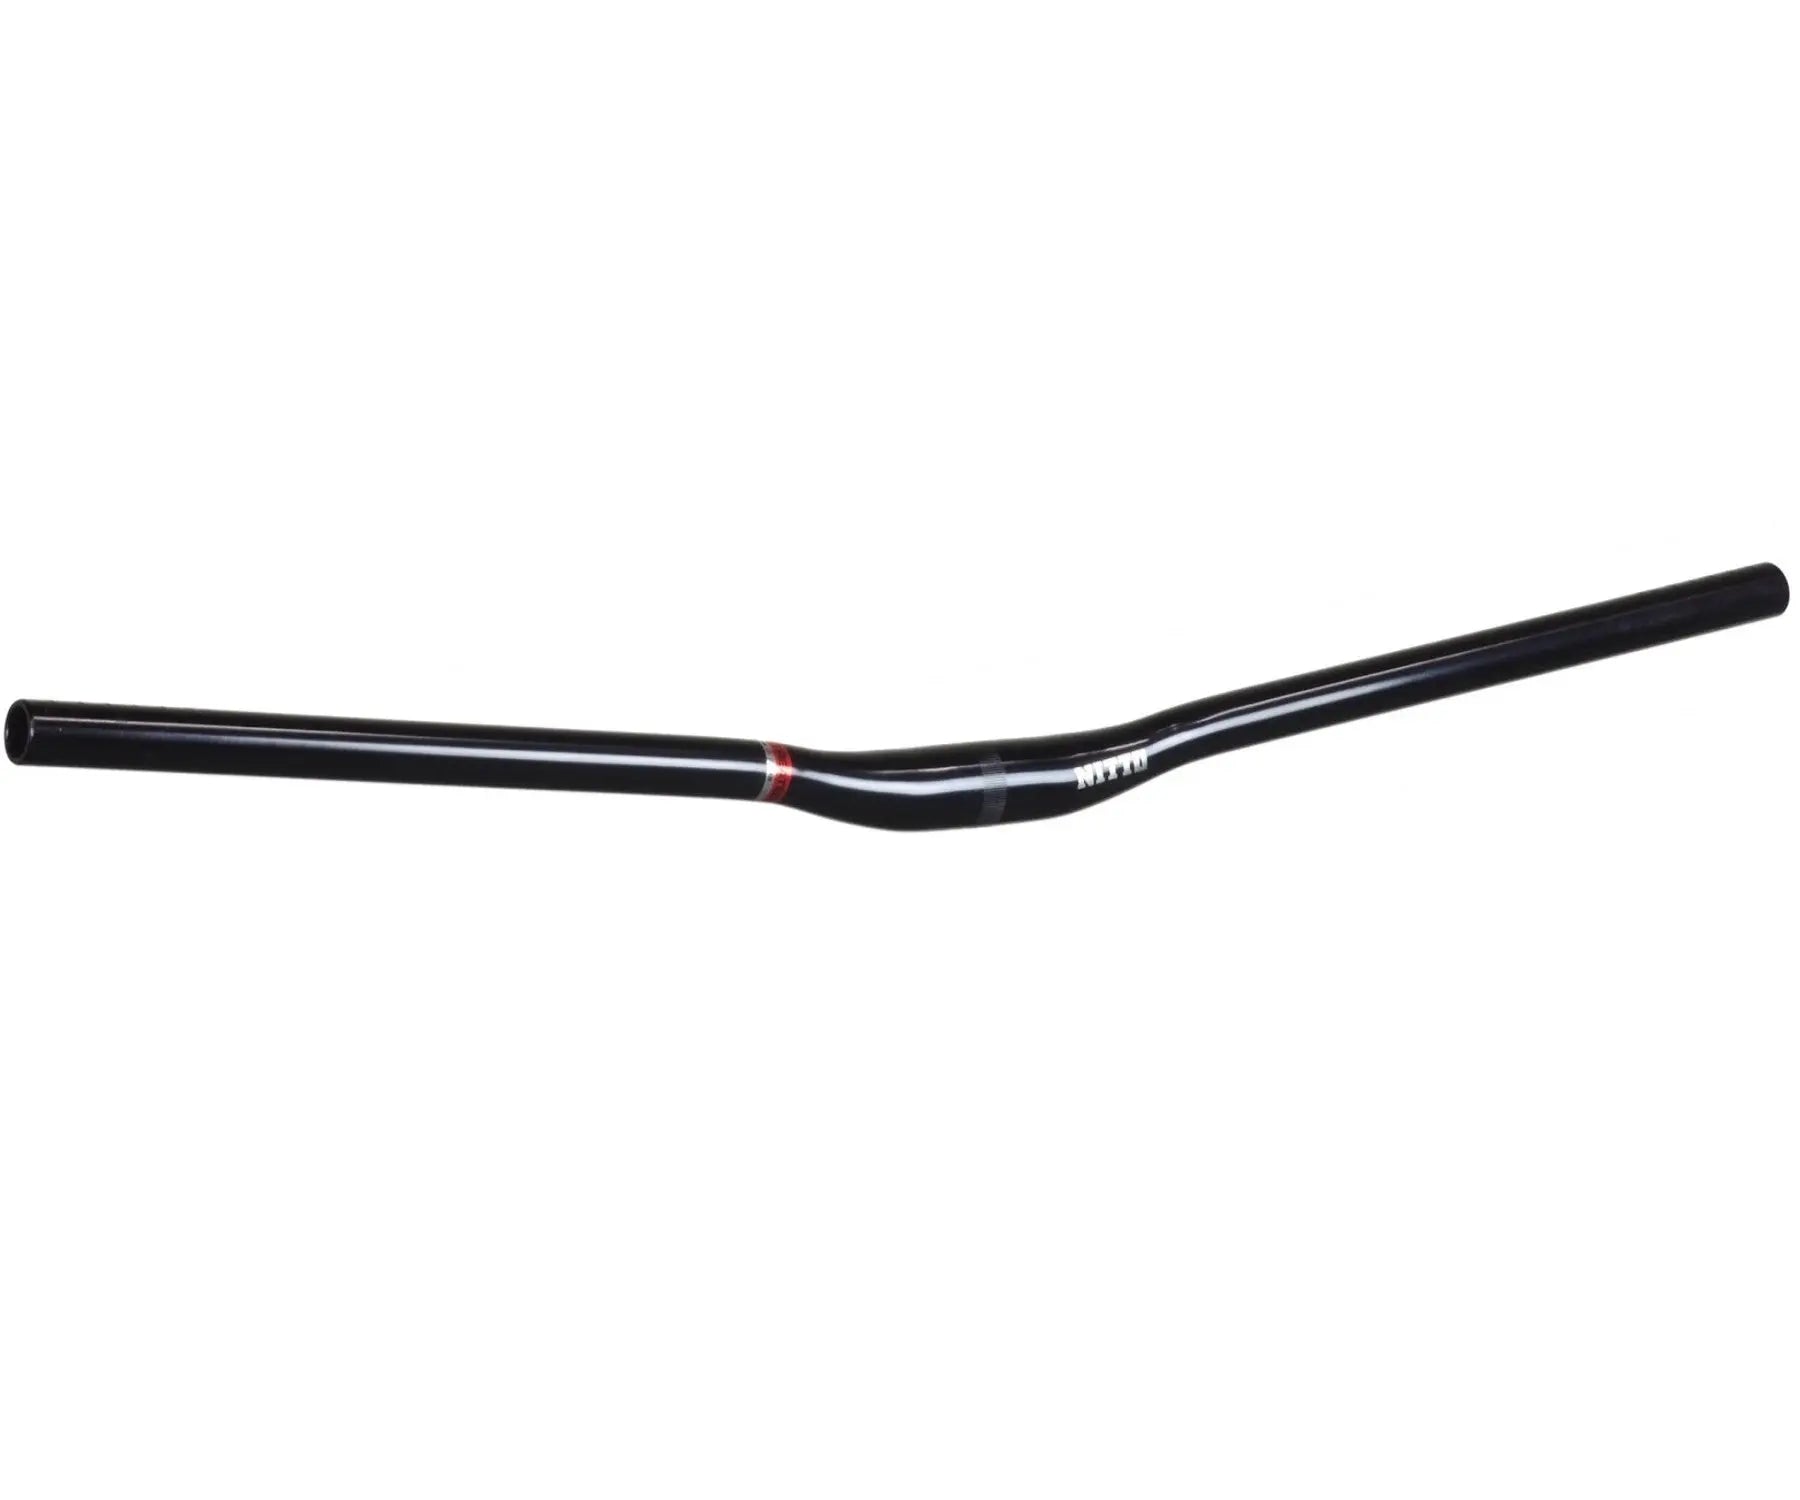 Nitto For Shred Bars, 650mm